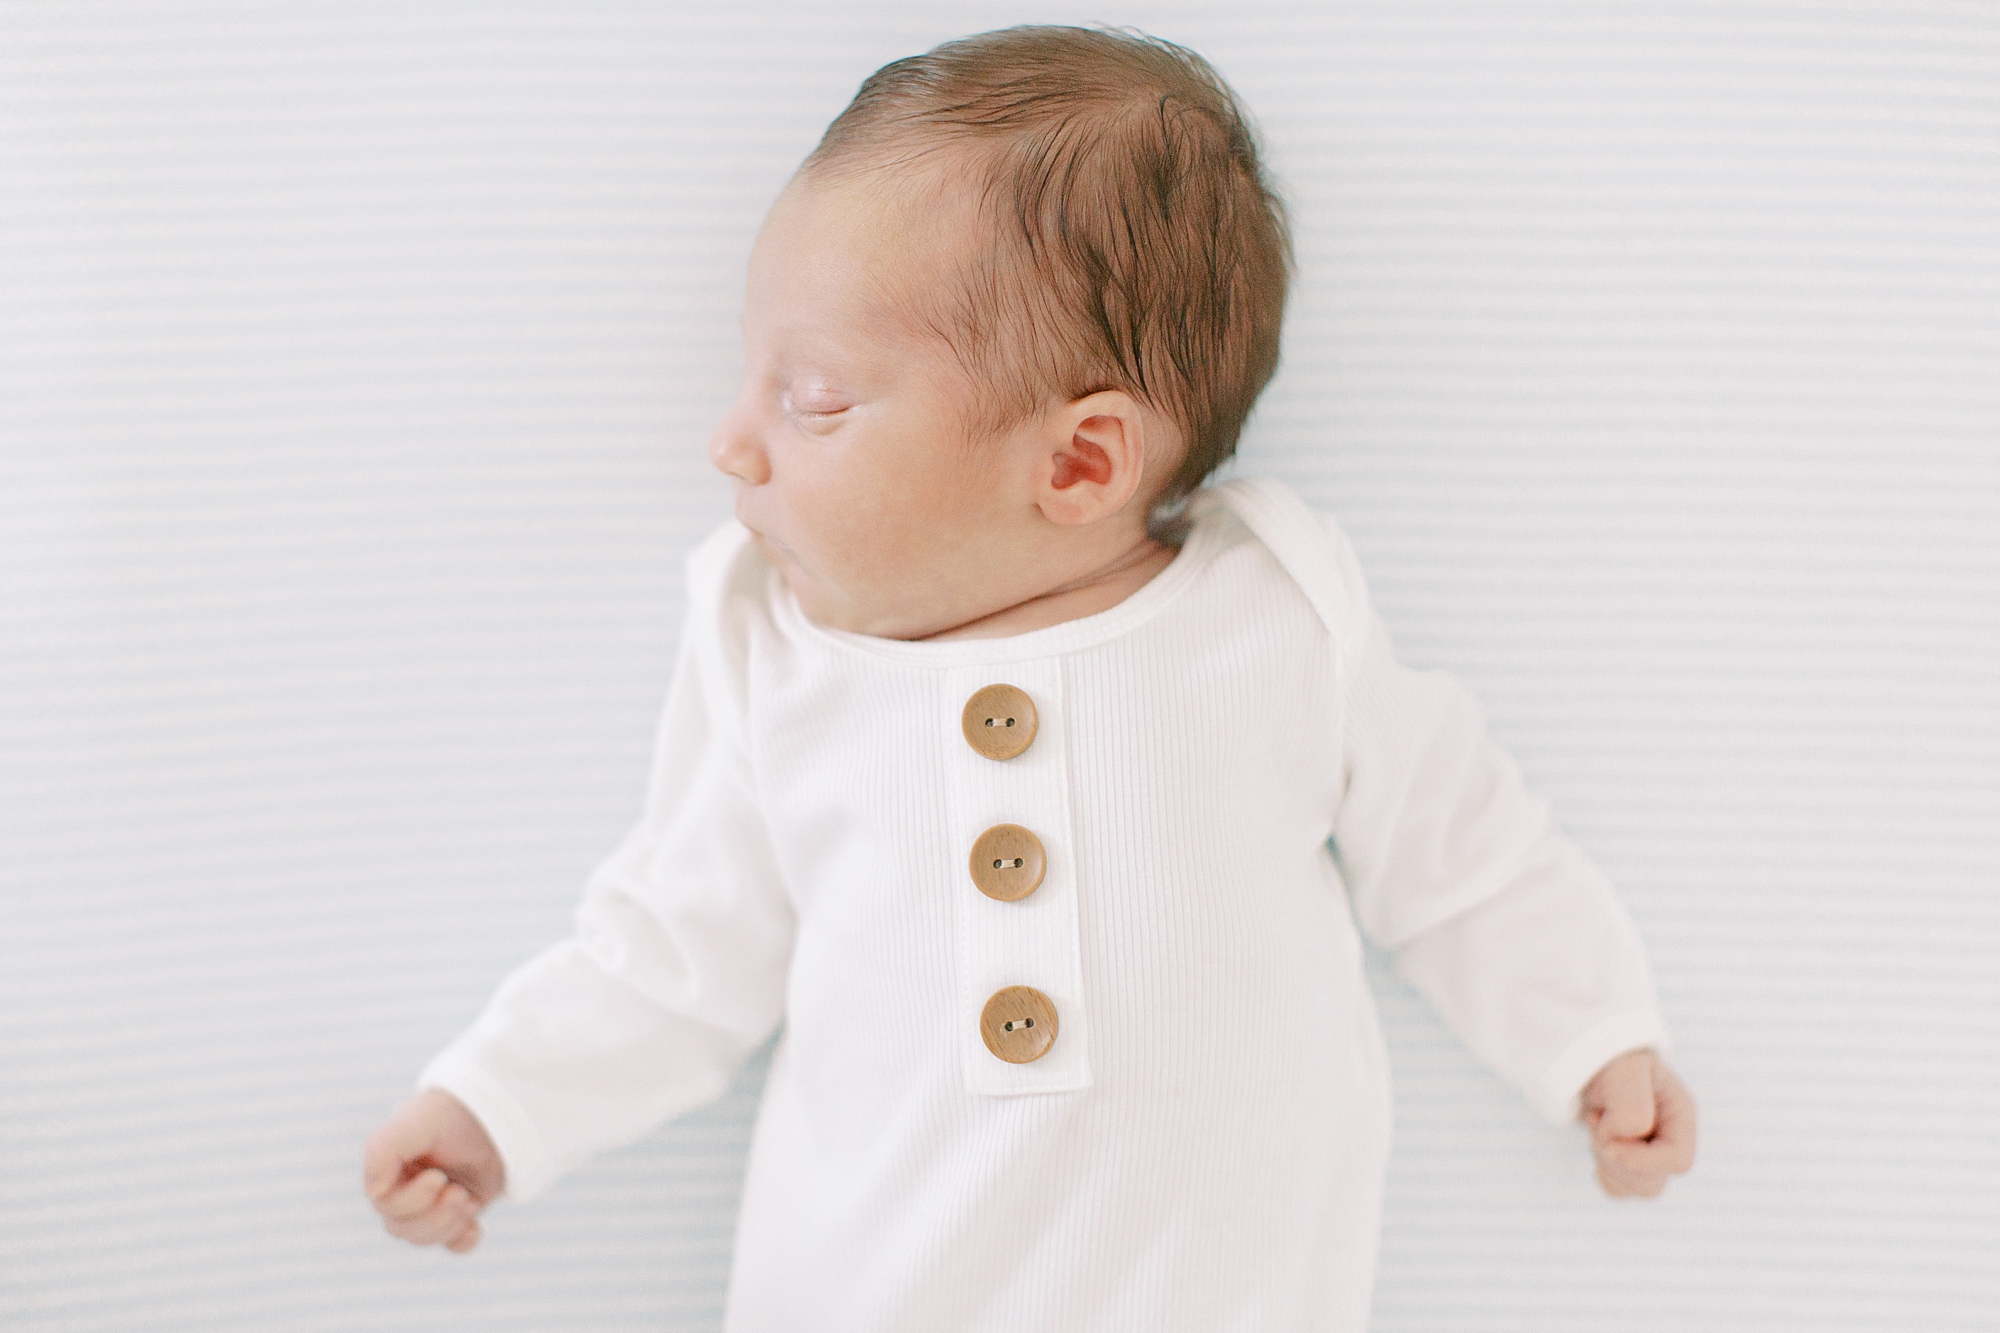 baby boy sleeps in white onesie with wooden buttons